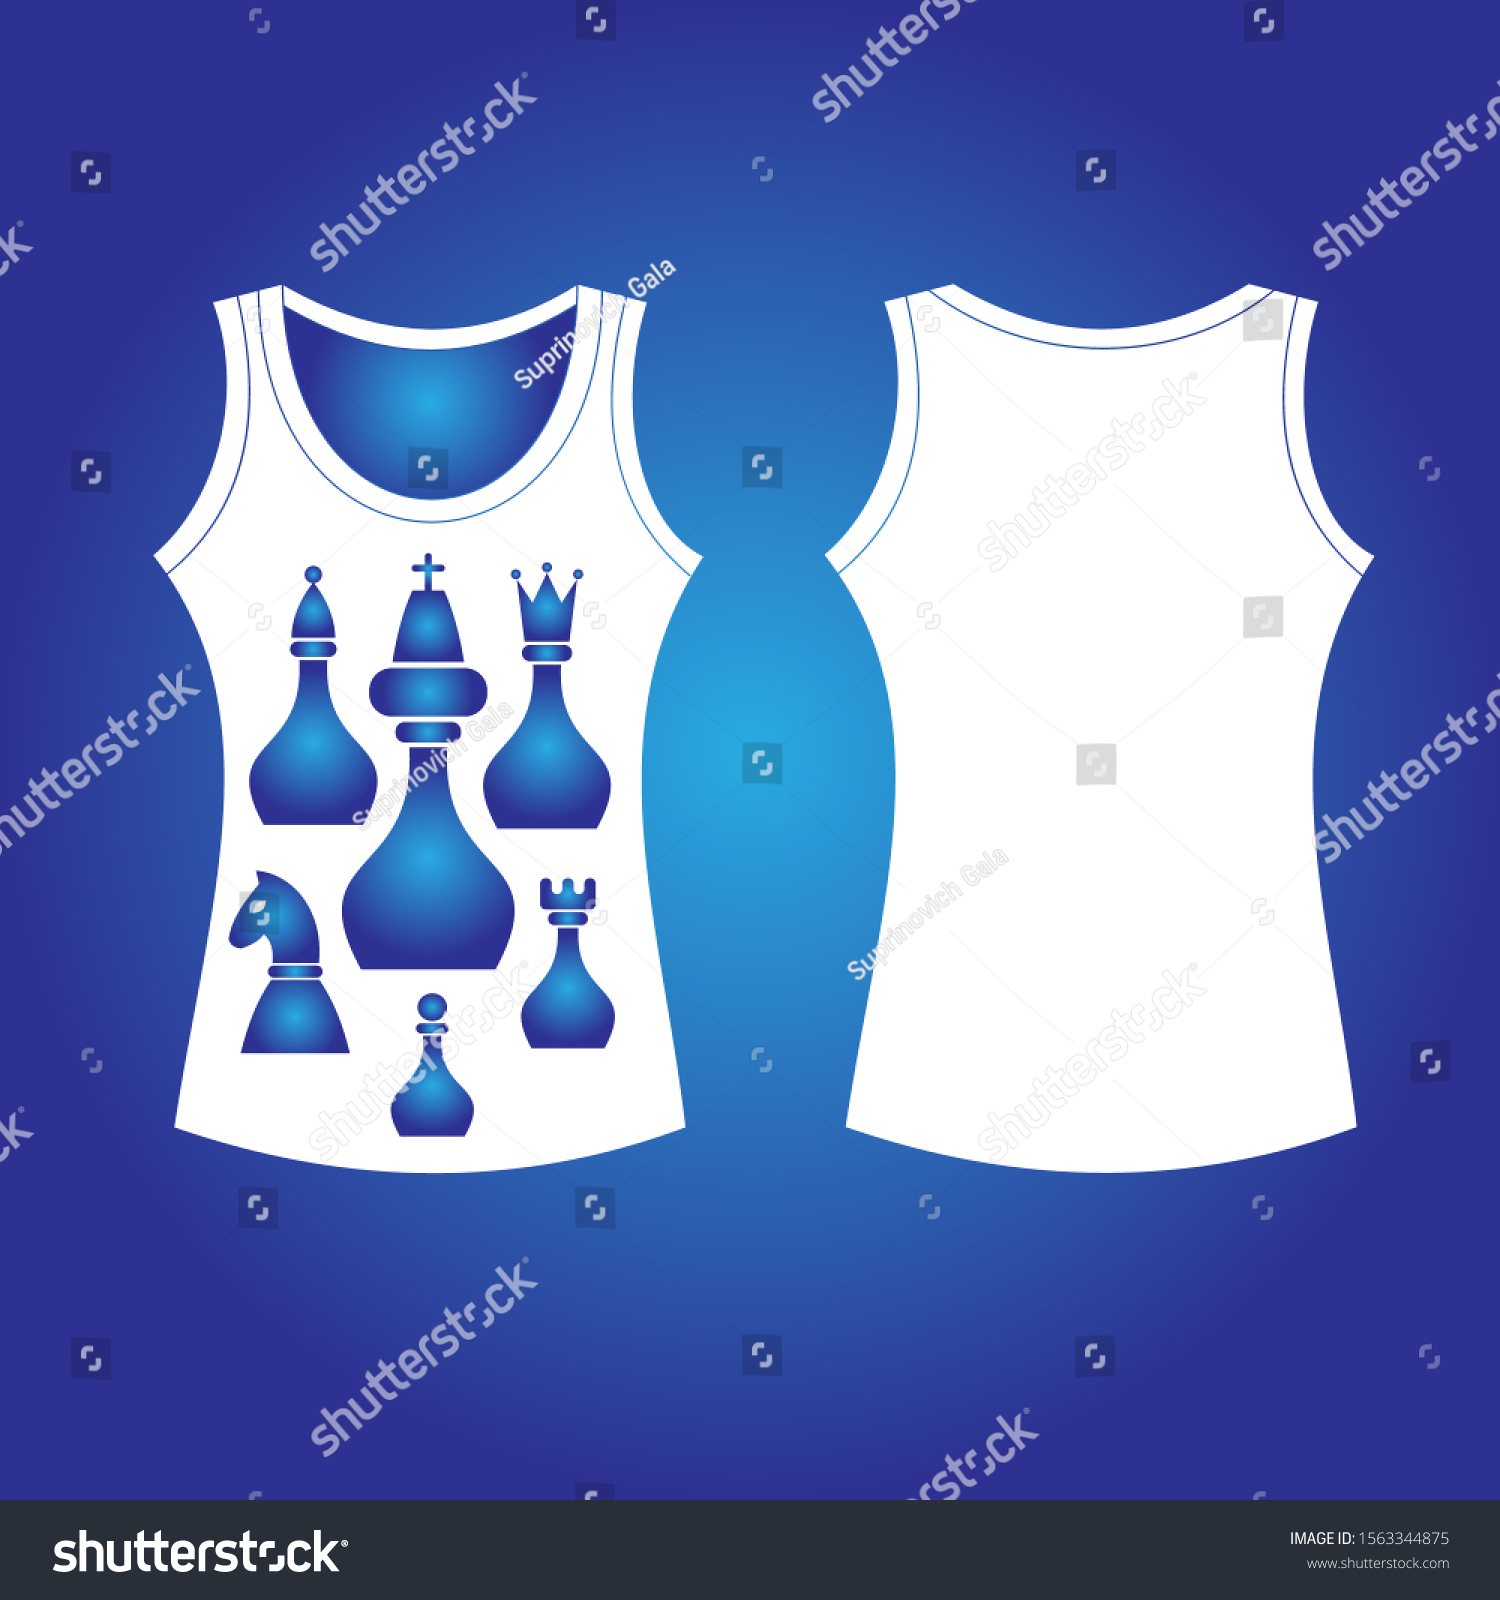 SVG of Technical drawing of T-shirts with Chess pieces print. Front and back views. Vector illustration of casual clothes.   All elements are located on separate layers.  svg